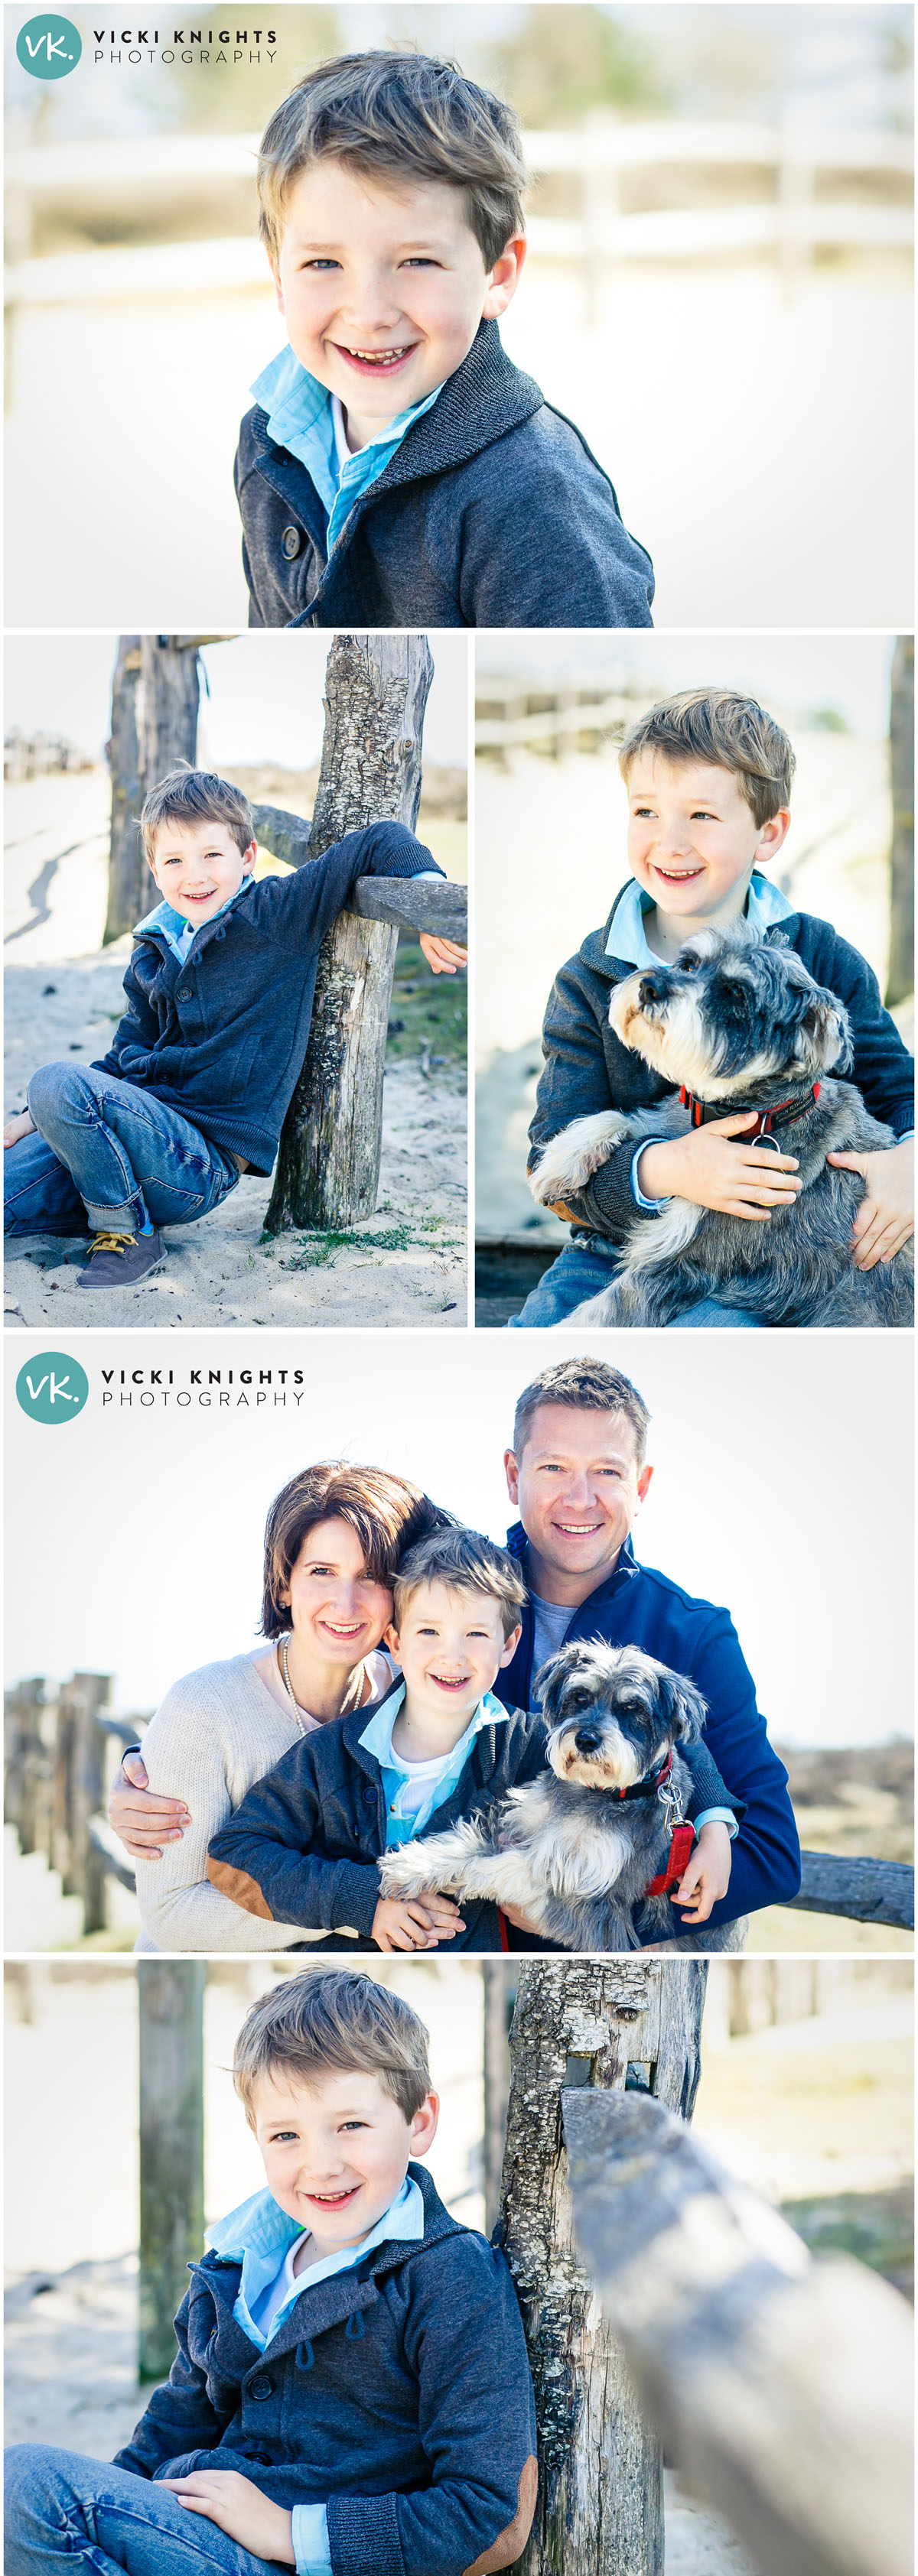 guildford-family-photographer[1]